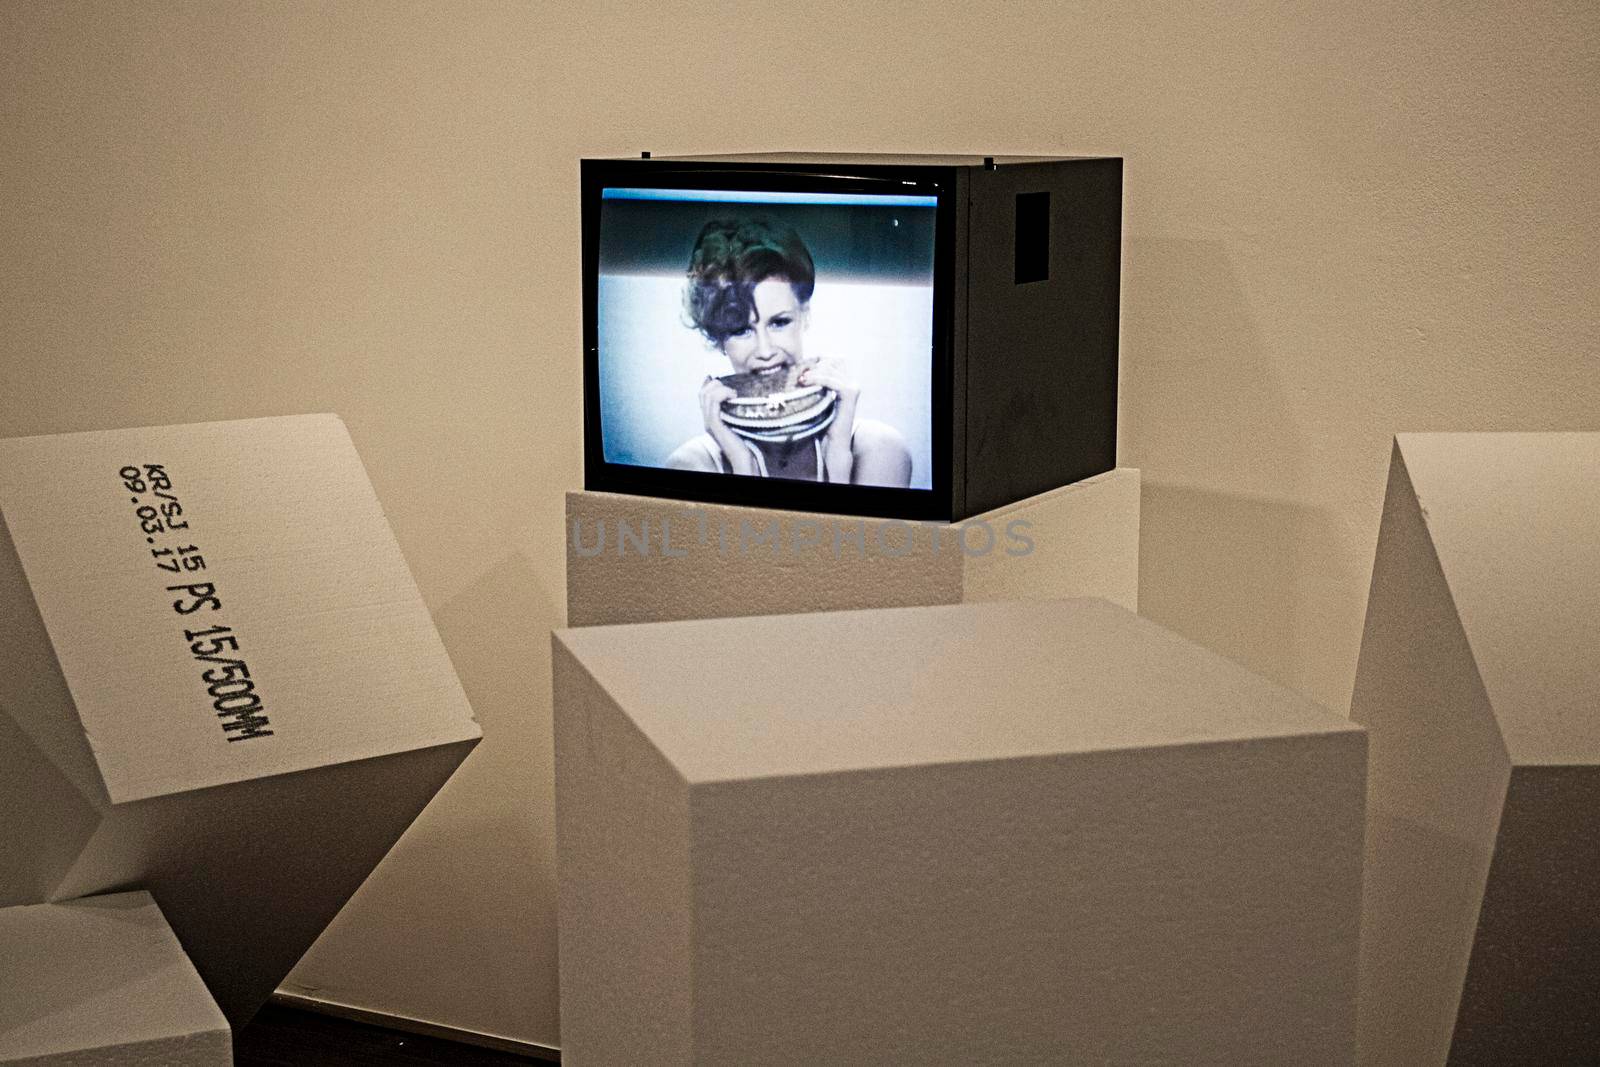 Modern art composition with a television and some cubes in a museum